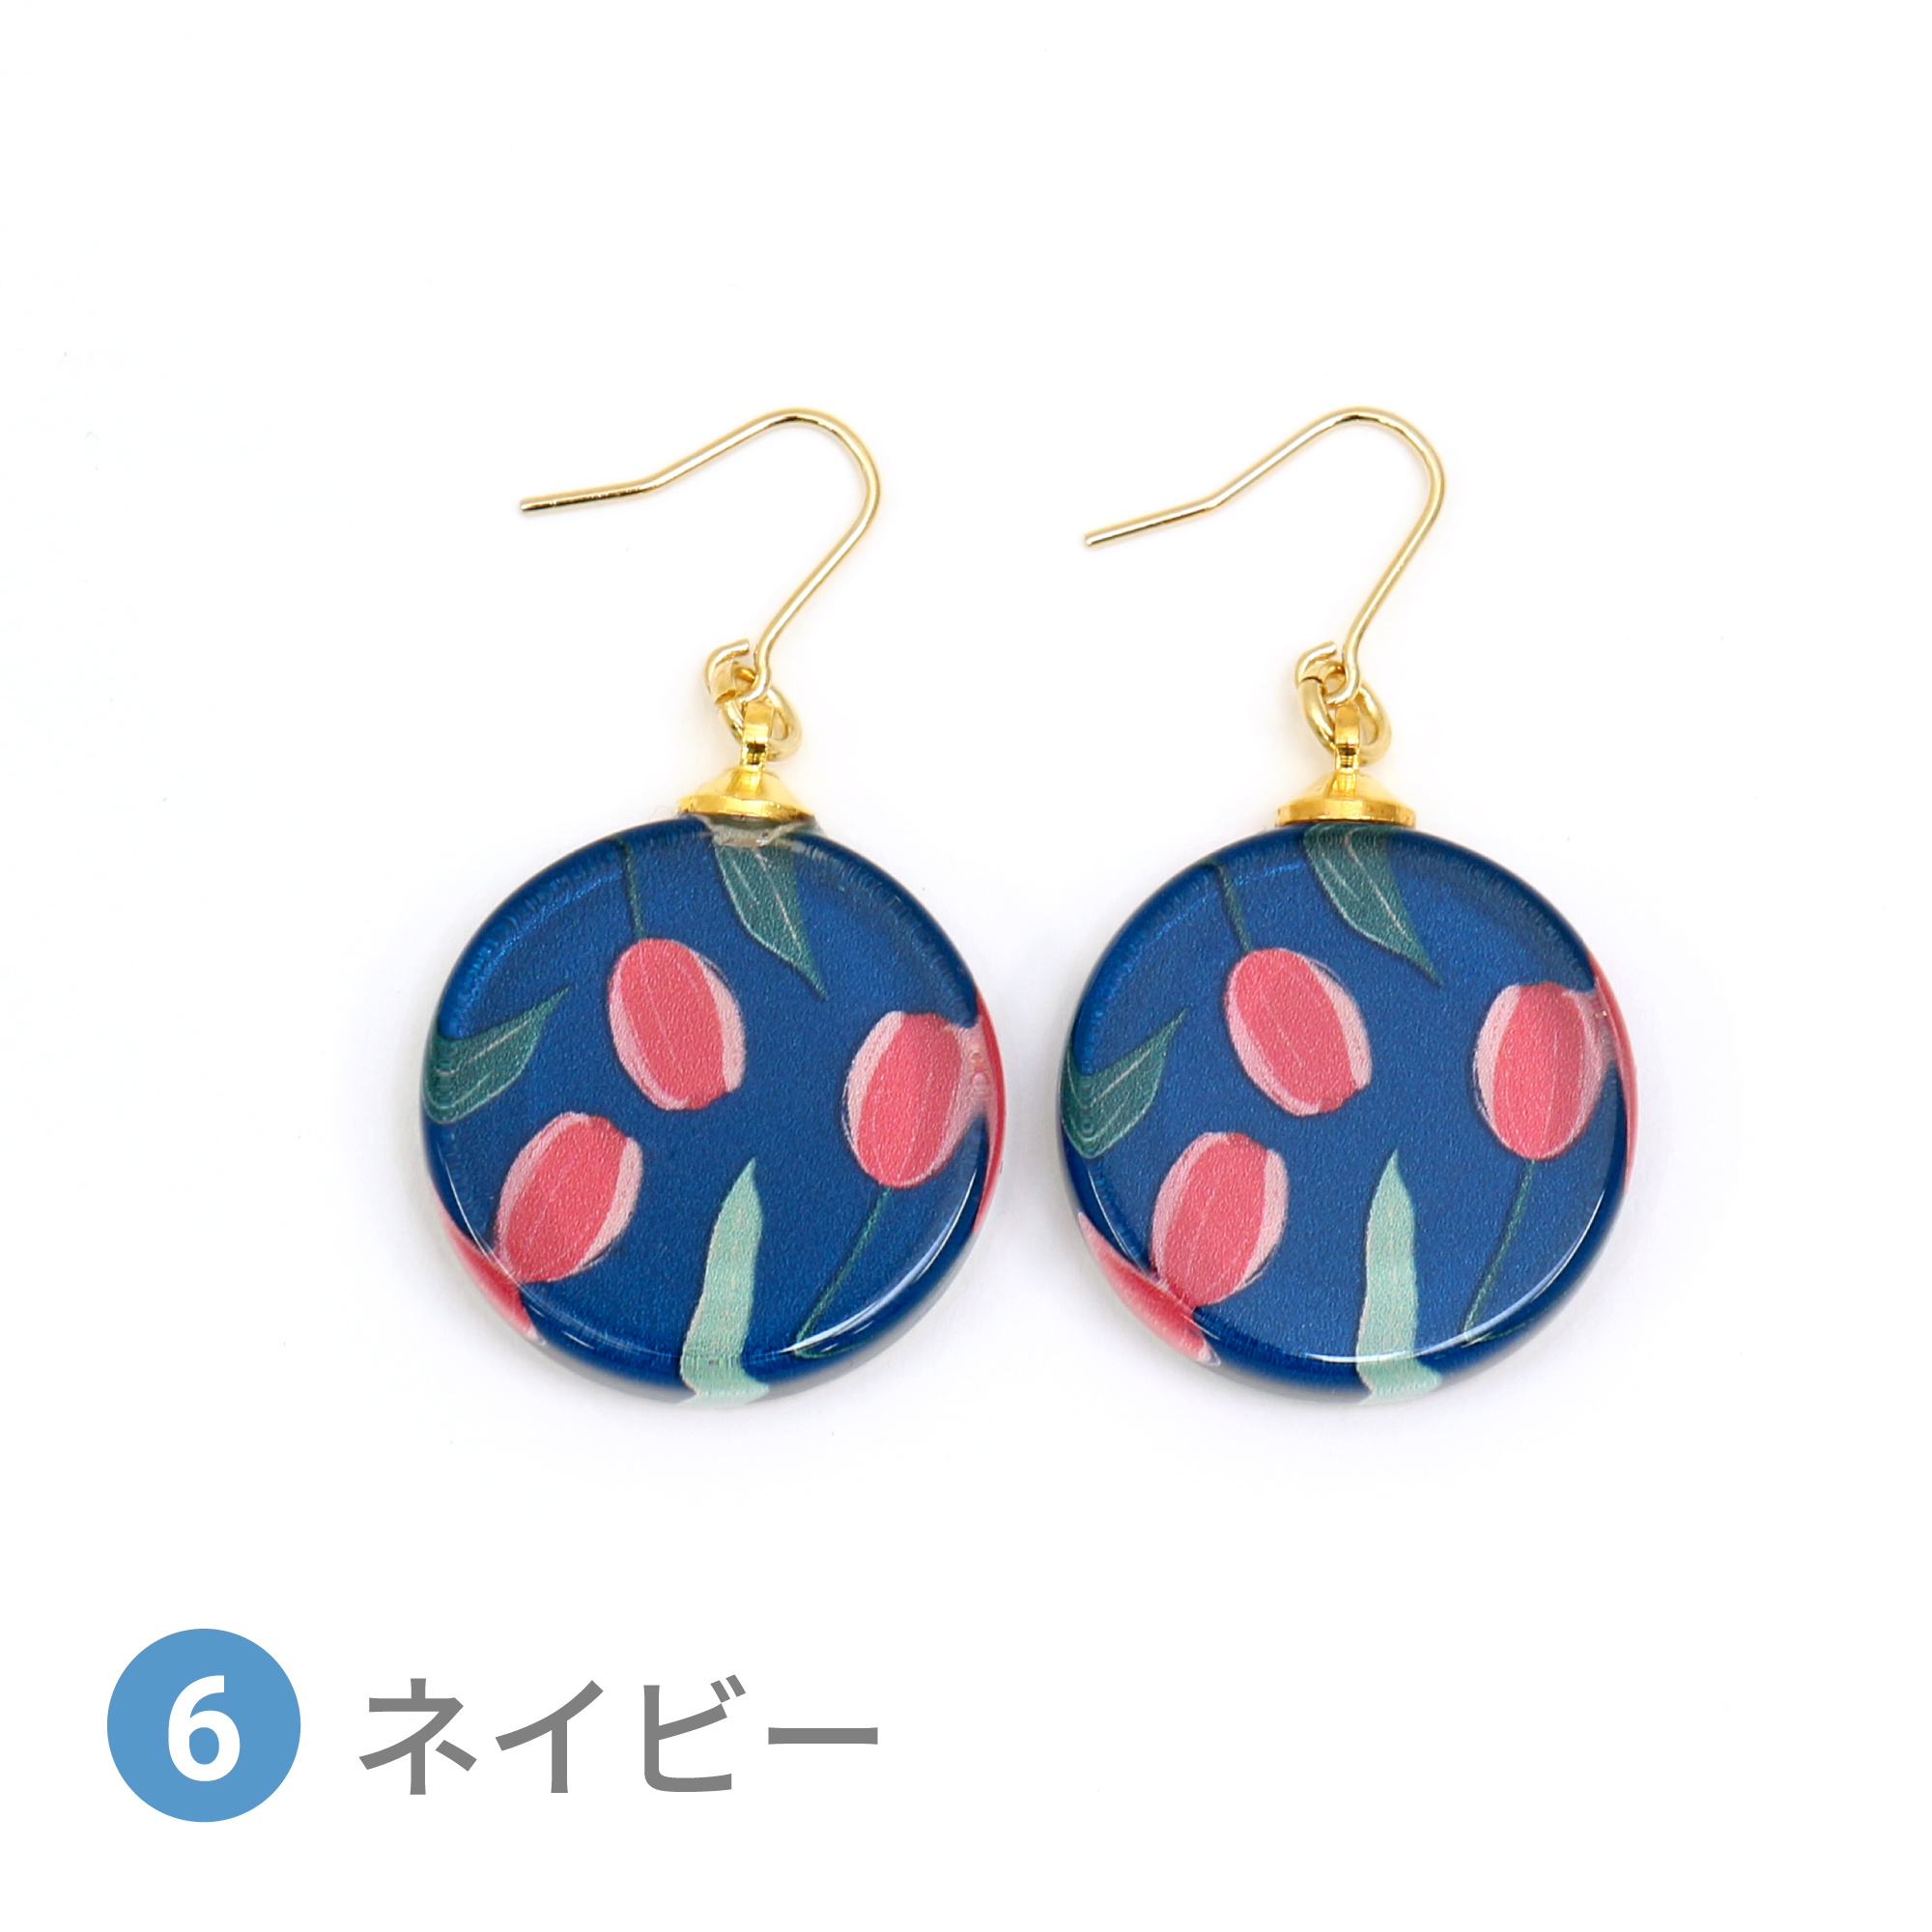 Glass accessories Pierced Earring TULIP navy round shape